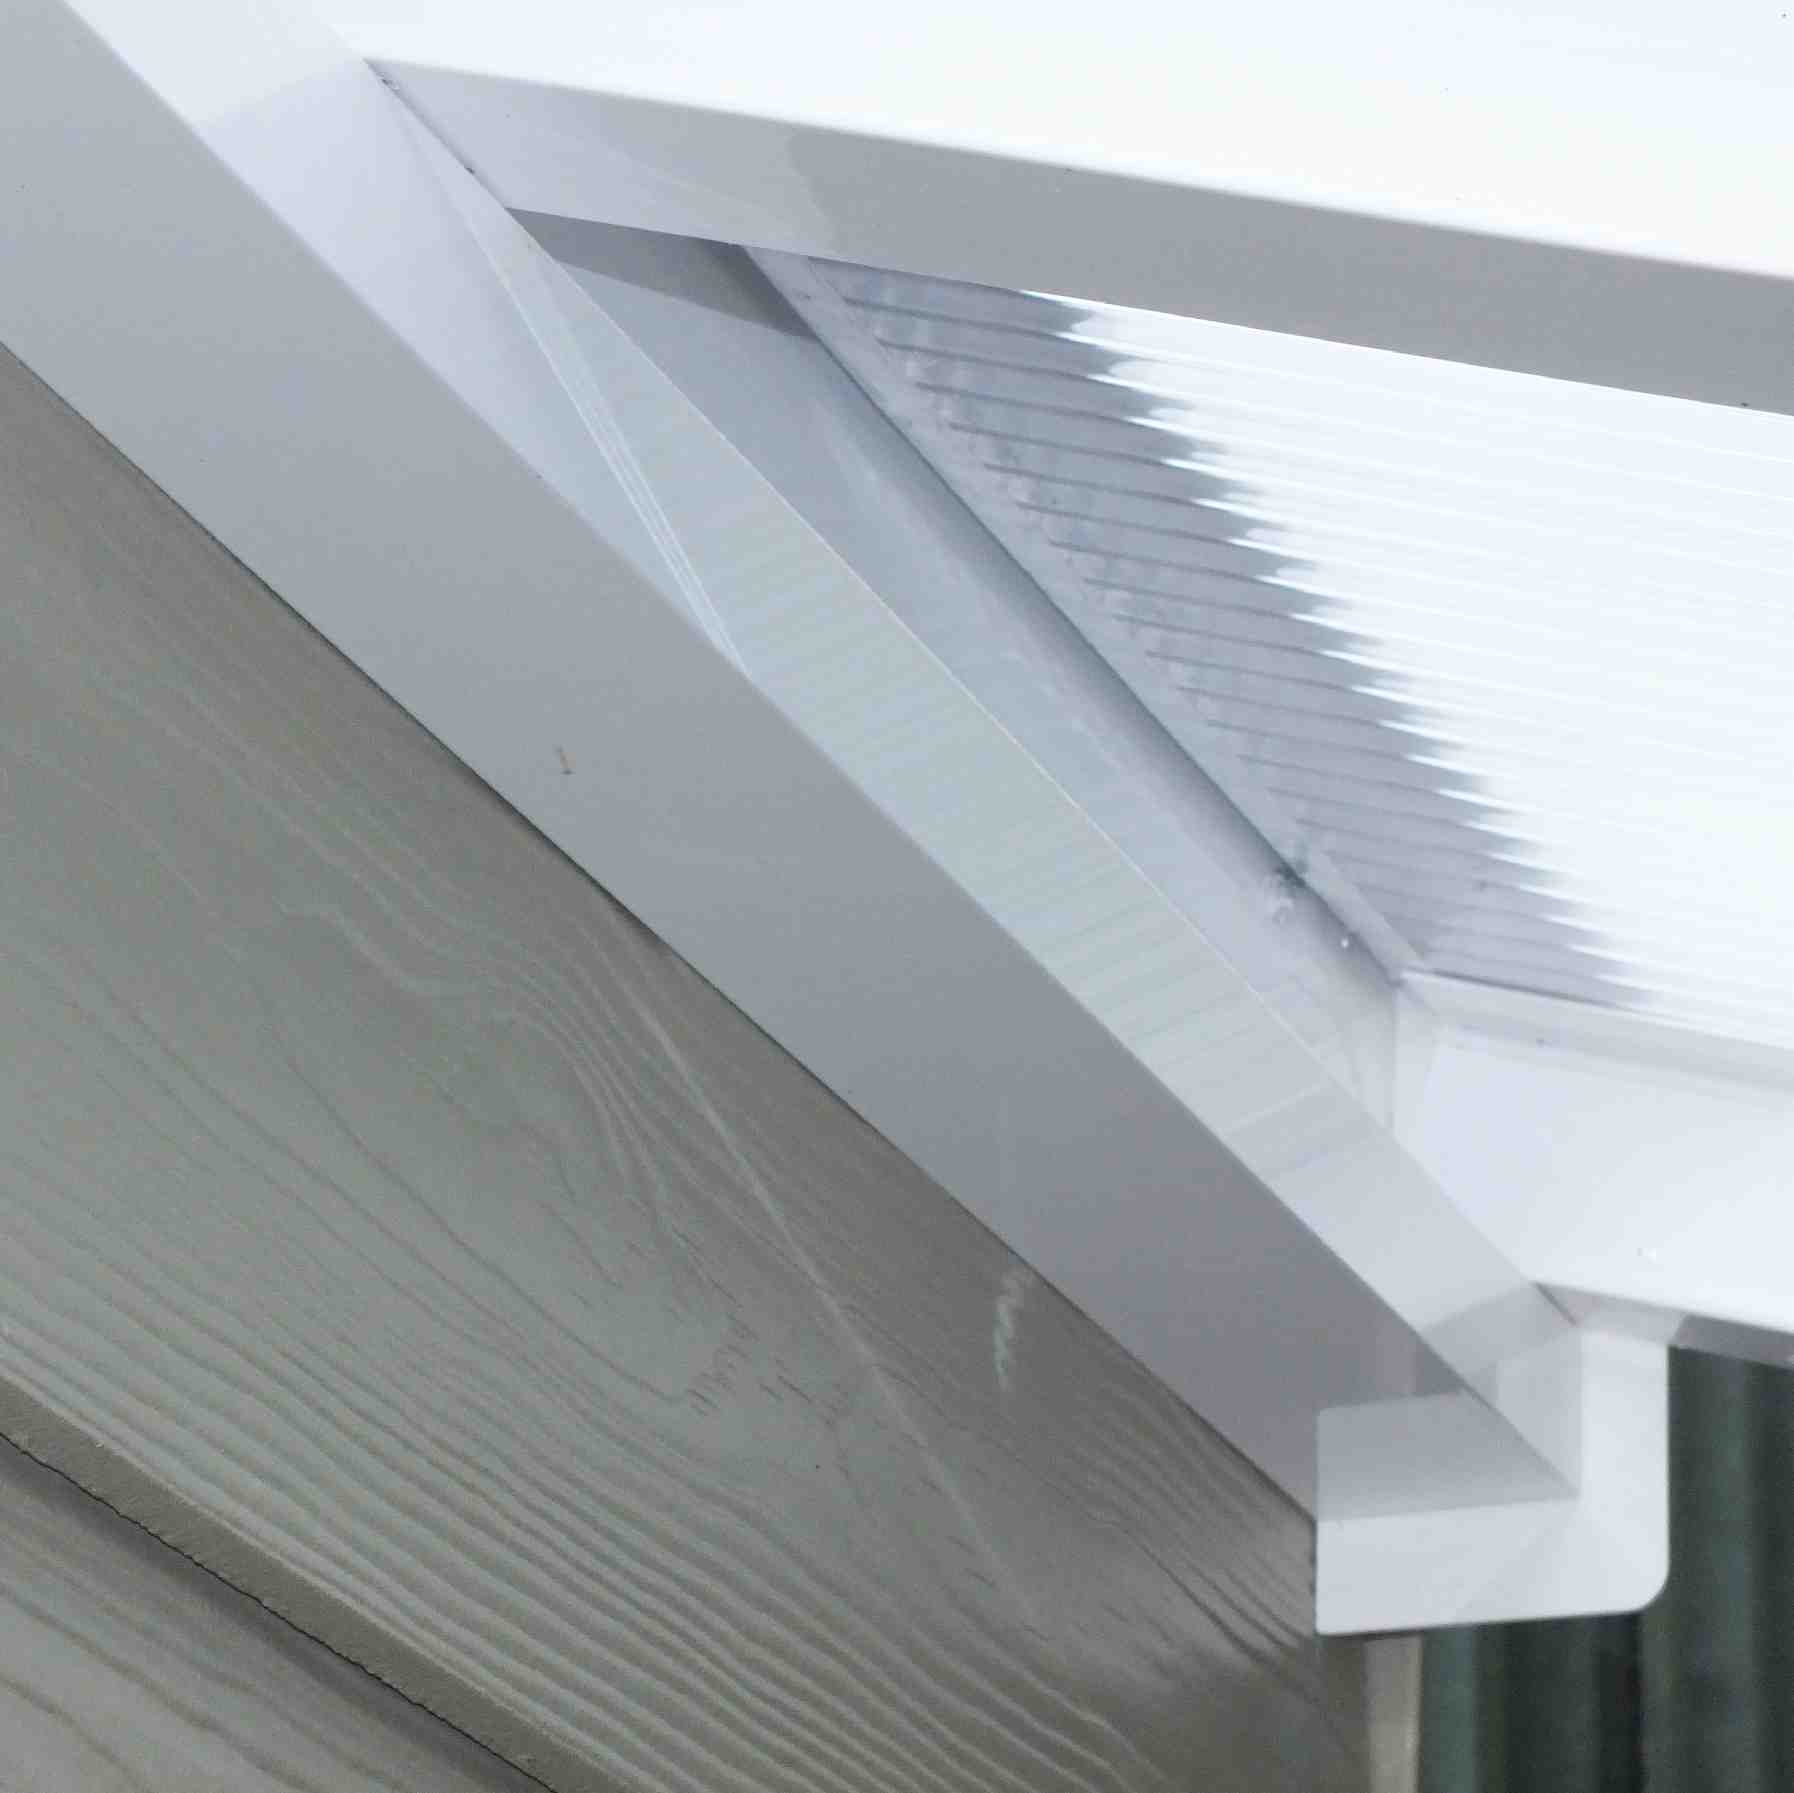 Great deals on Omega Verandah White with 16mm Polycarbonate Glazing - 9.5m (W) x 3.0m (P), (5) Supporting Posts